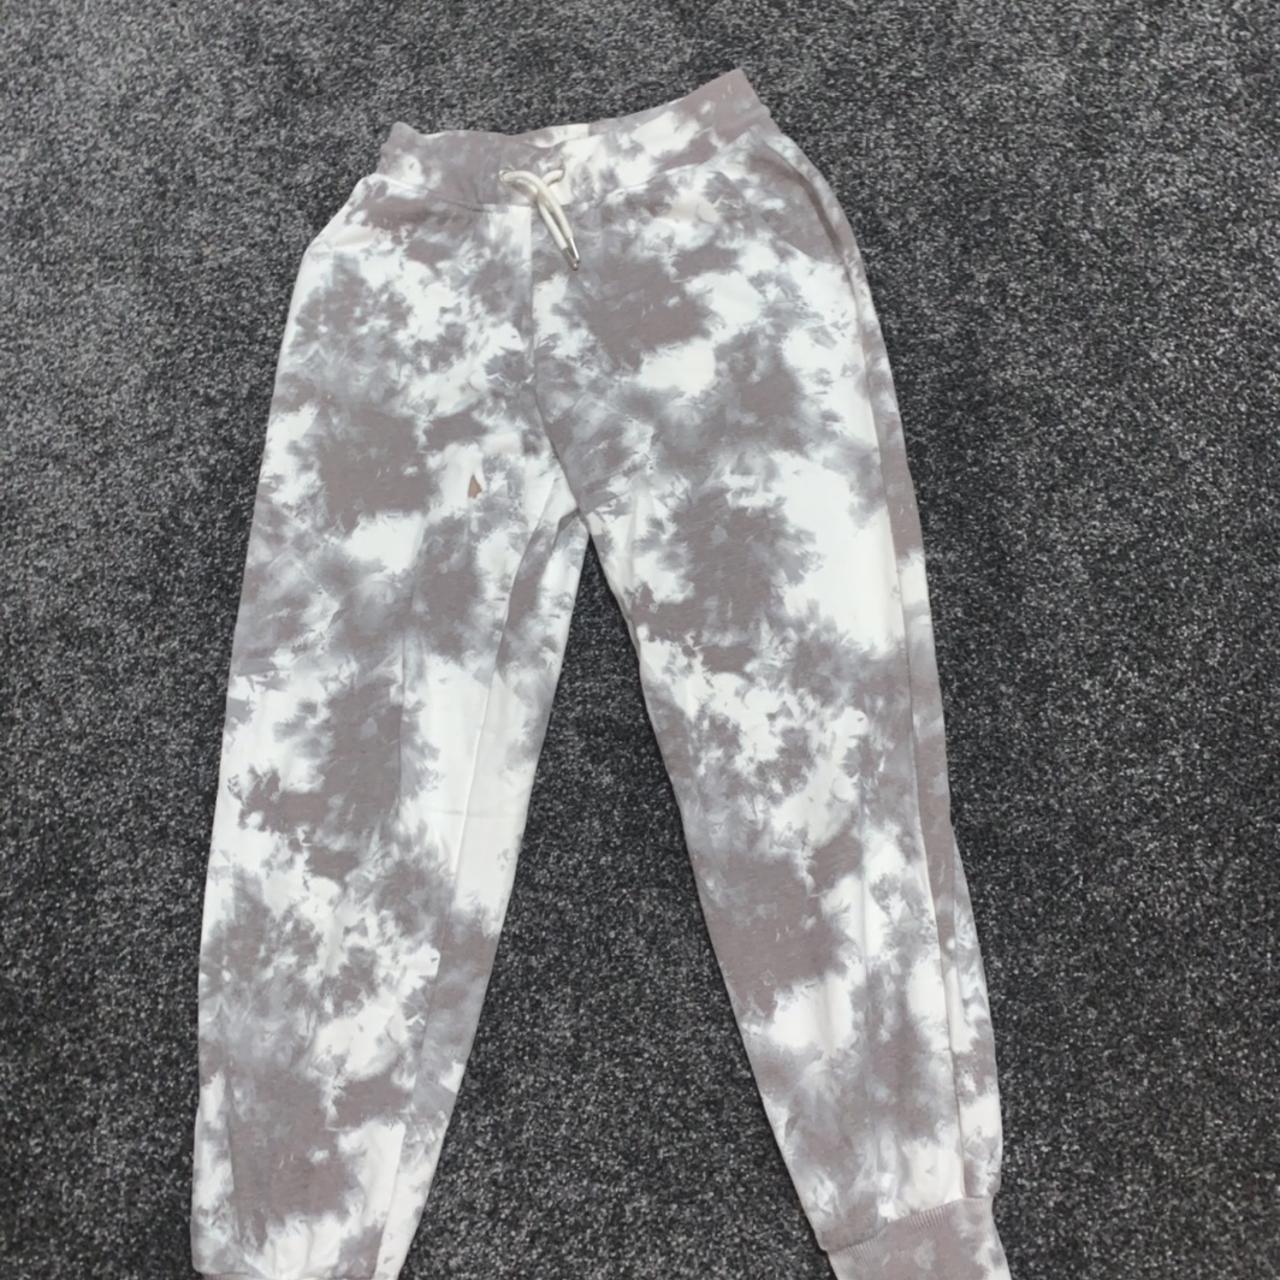 Cameo joggers, never worn, tags removed - Depop